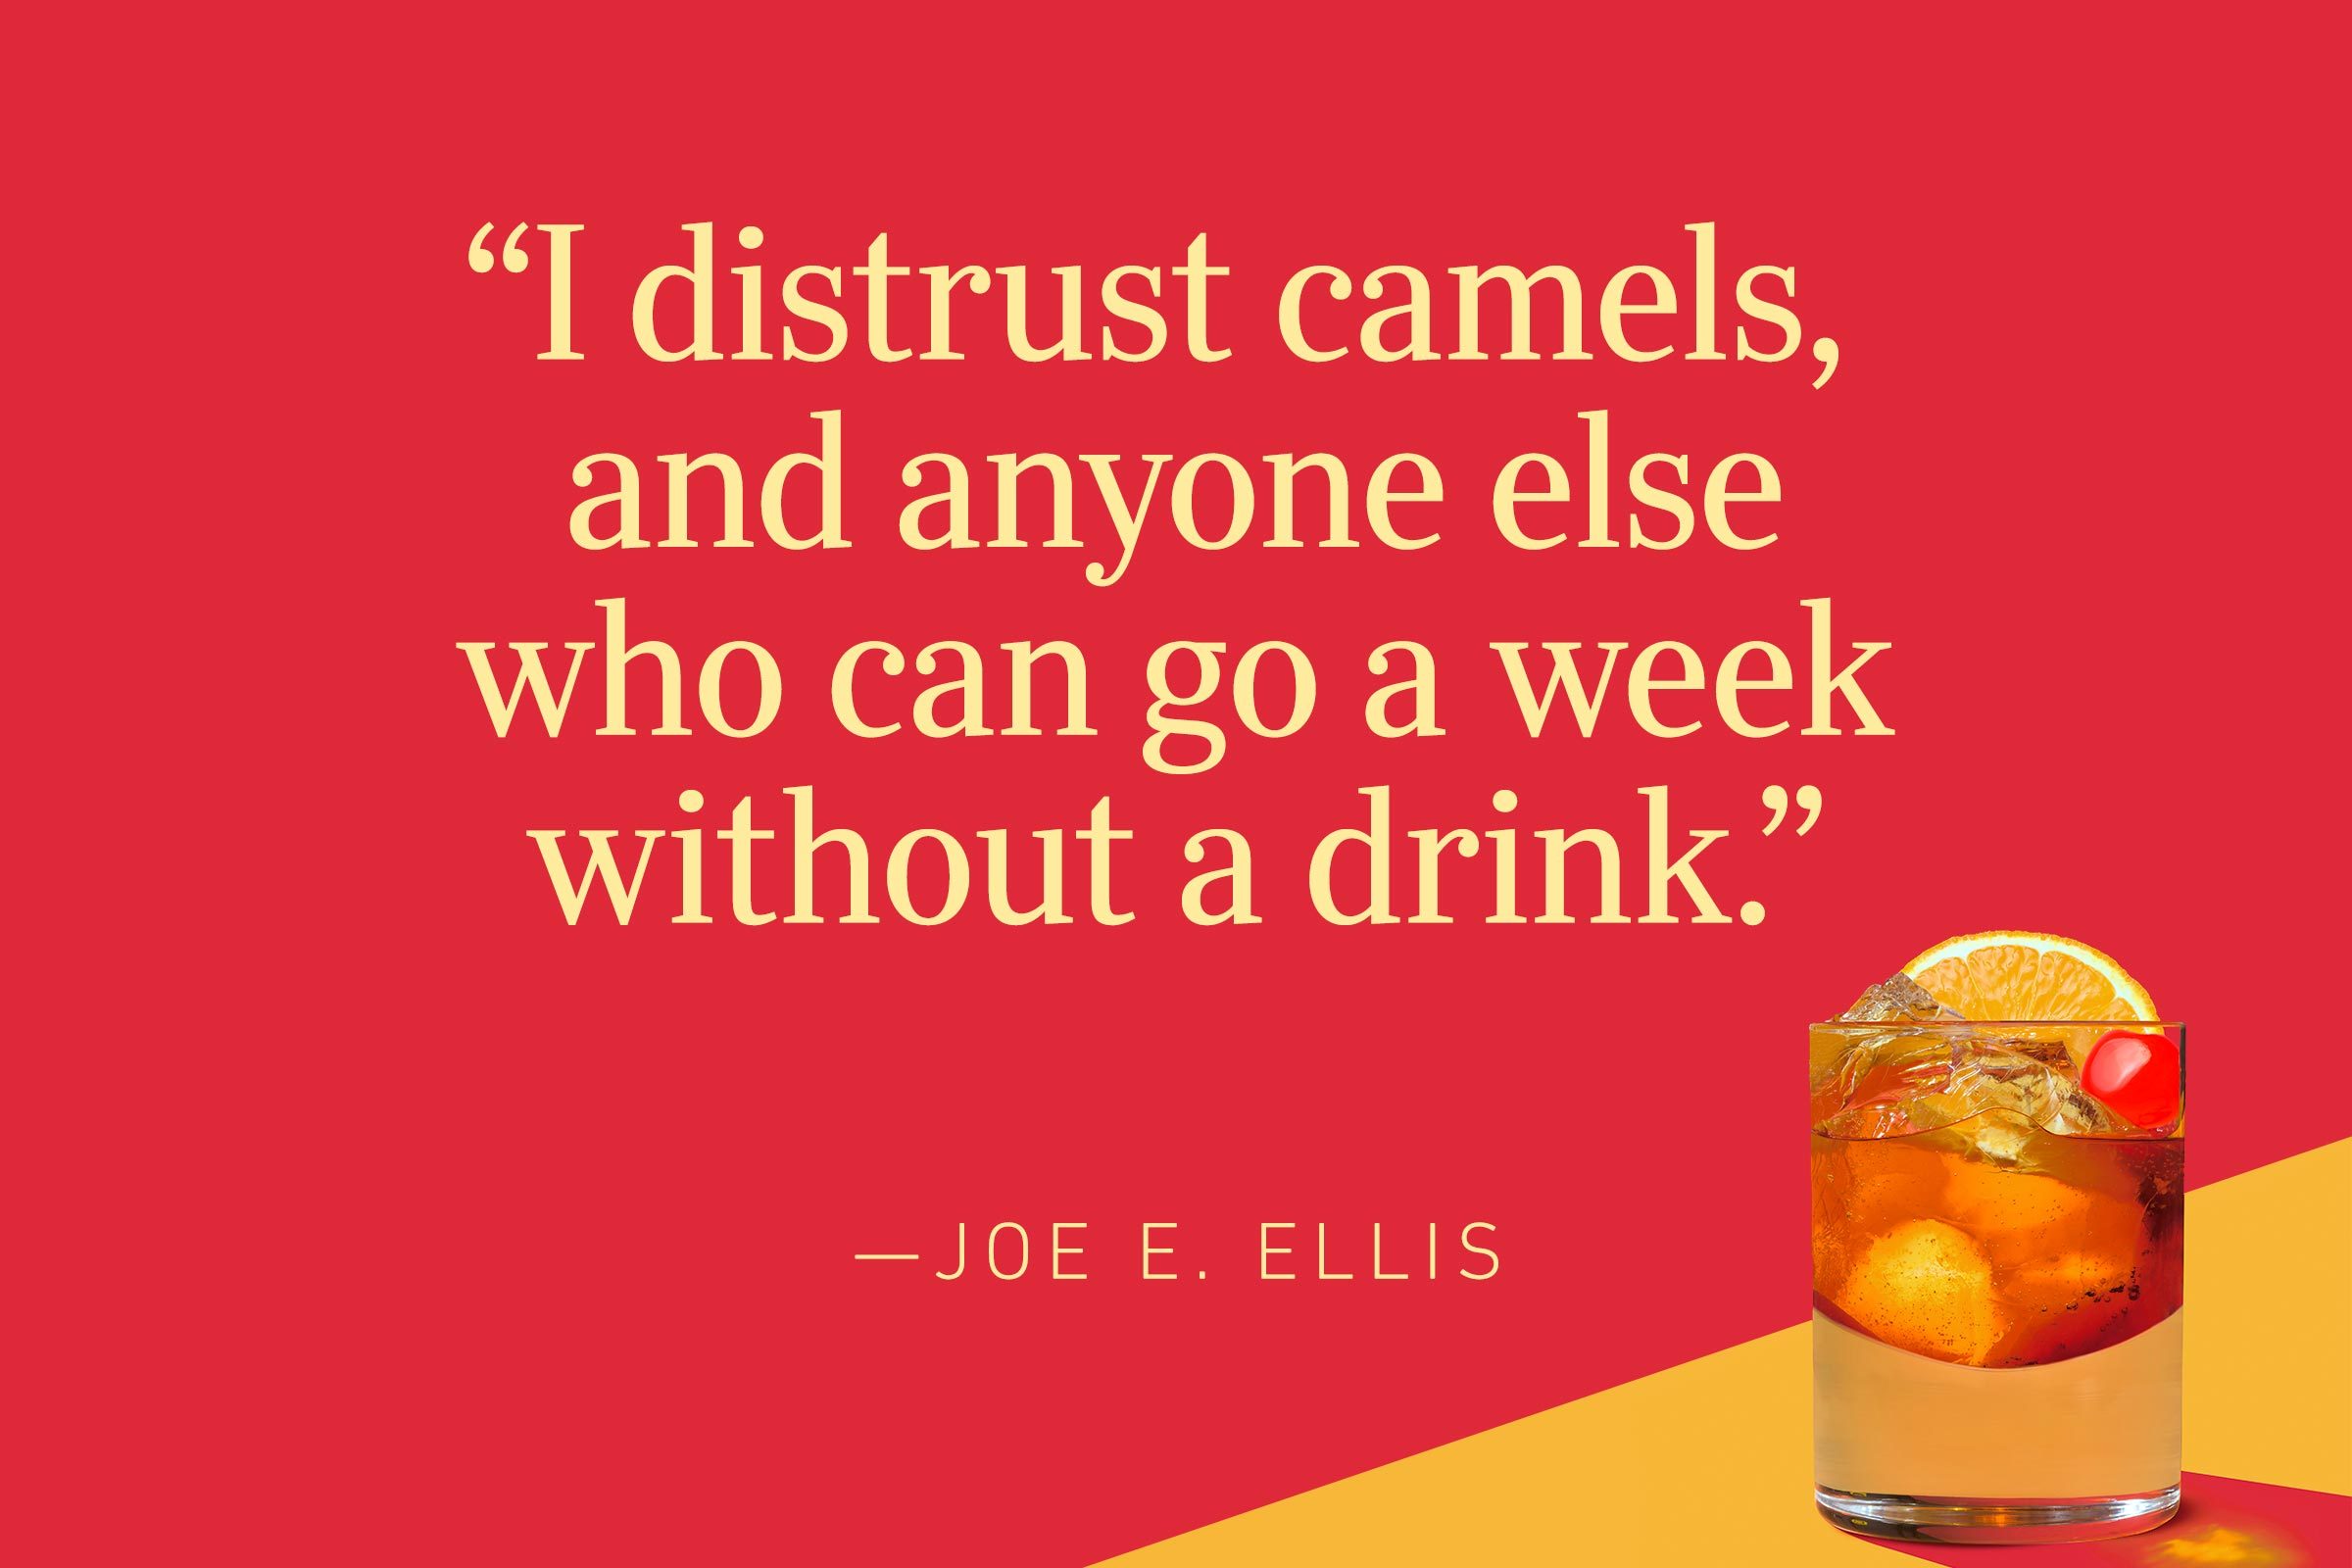 "I distrust camels, and anyone else who can go a week without a drink.